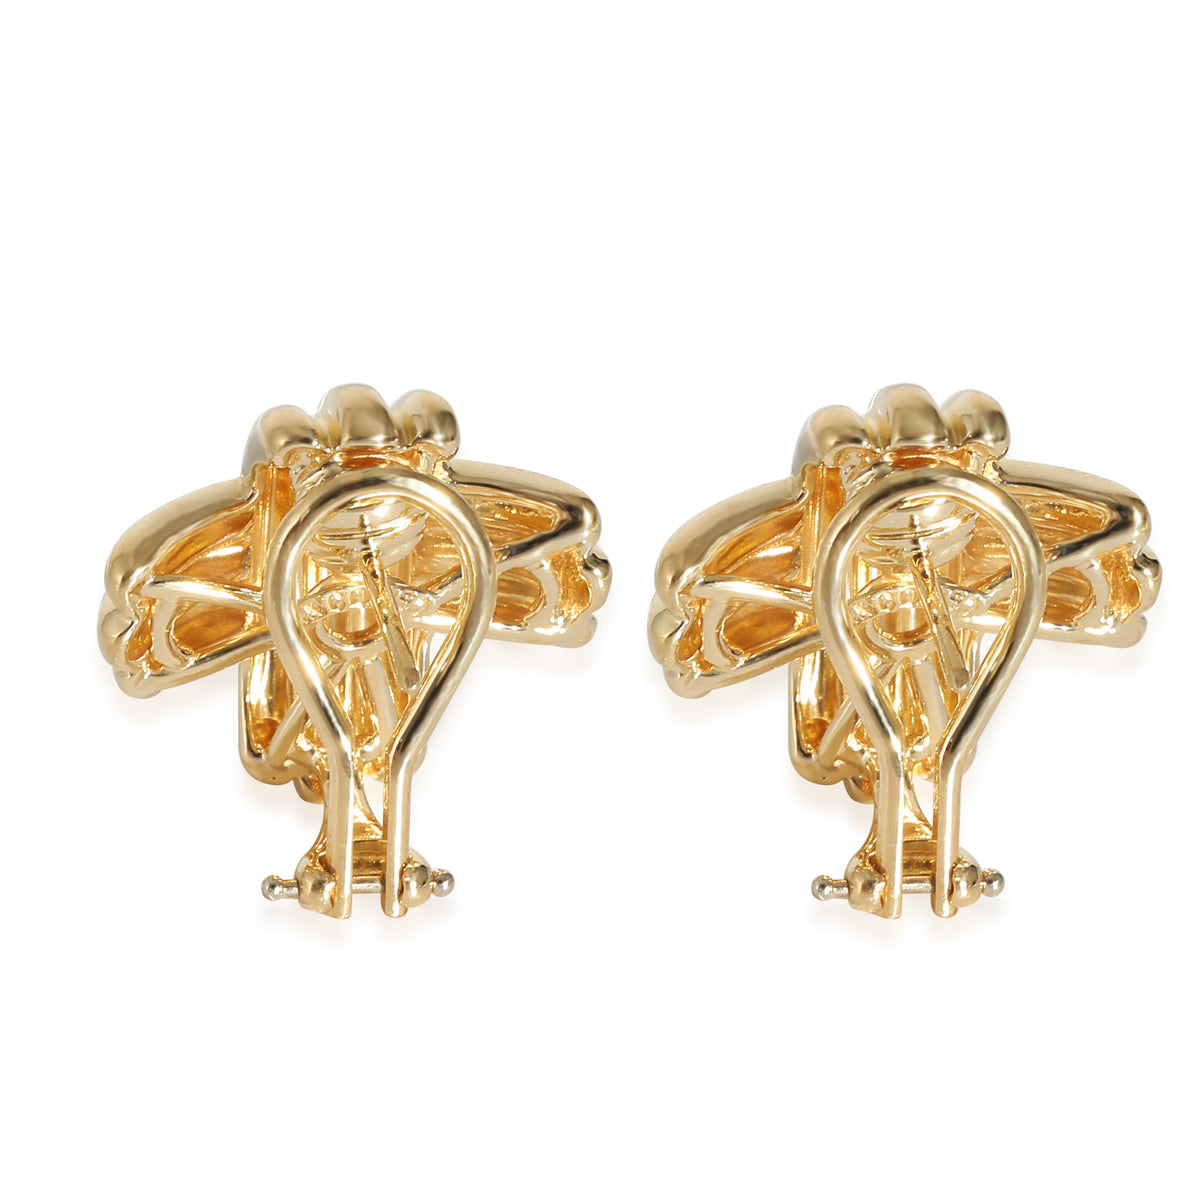 Tiffany & Co. Vintage Signature X Earrings in 18K Yellow Gold